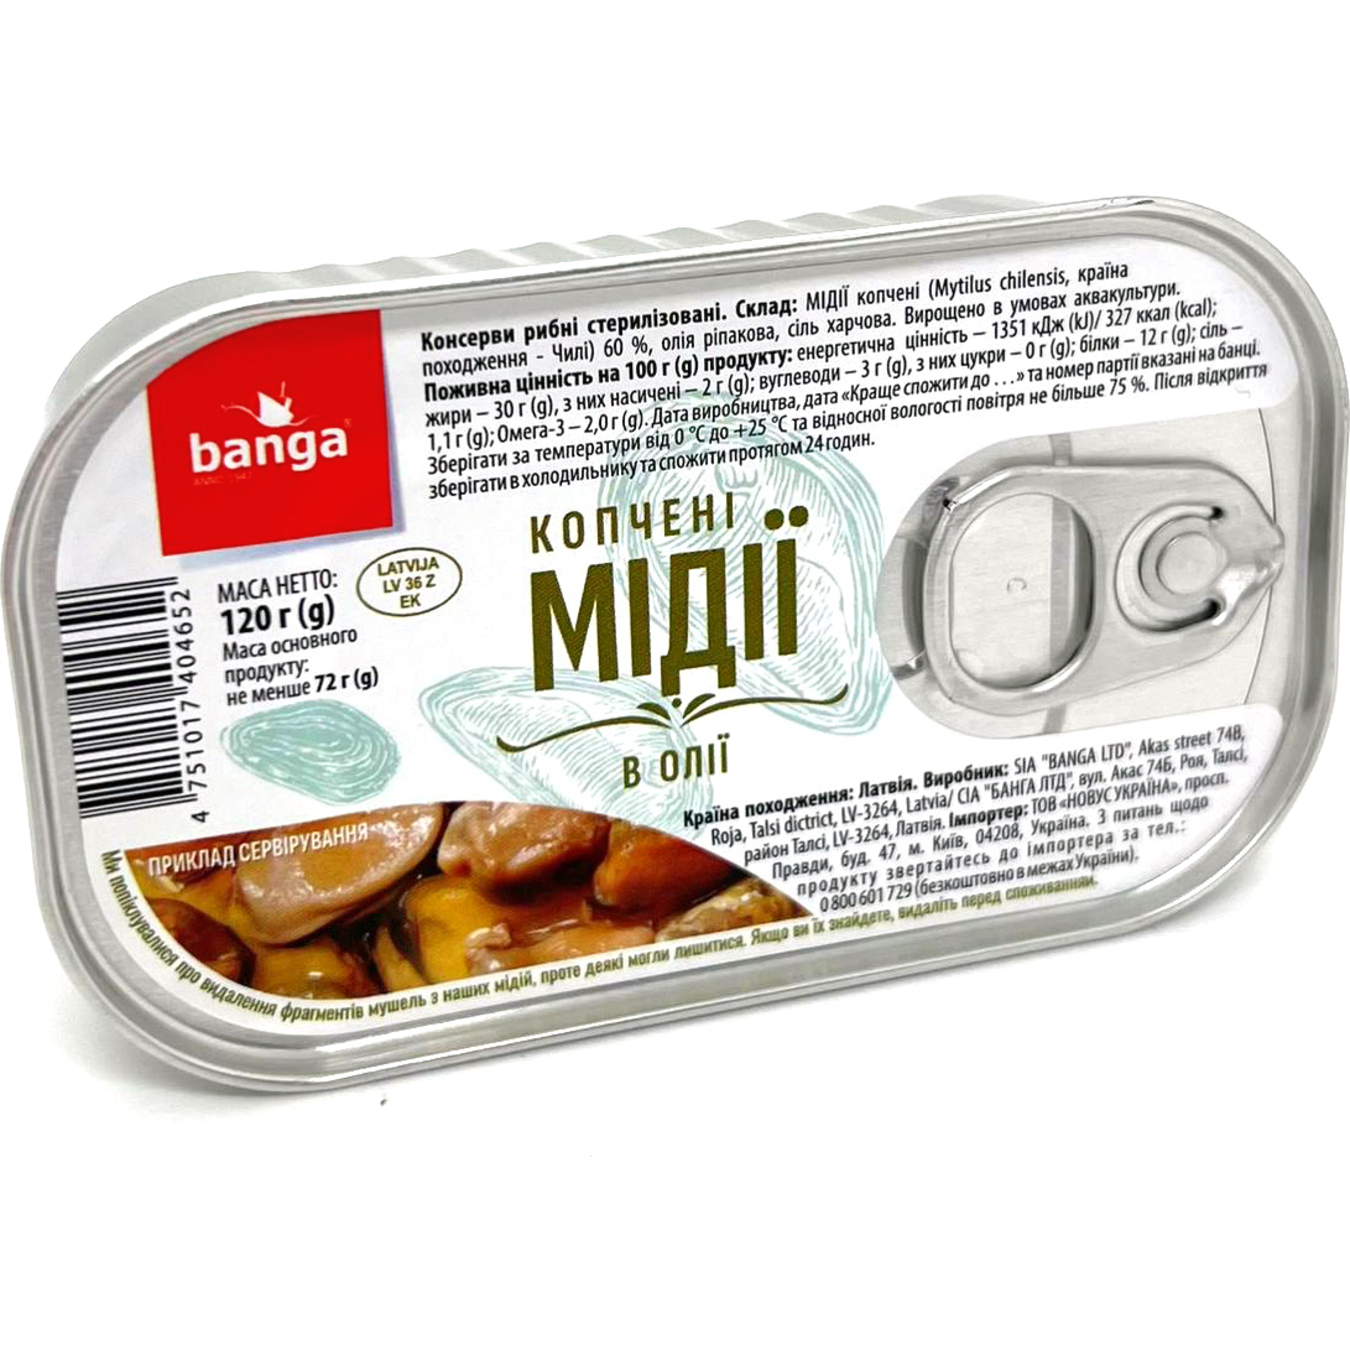 Banga mussels smoked in oil 120g